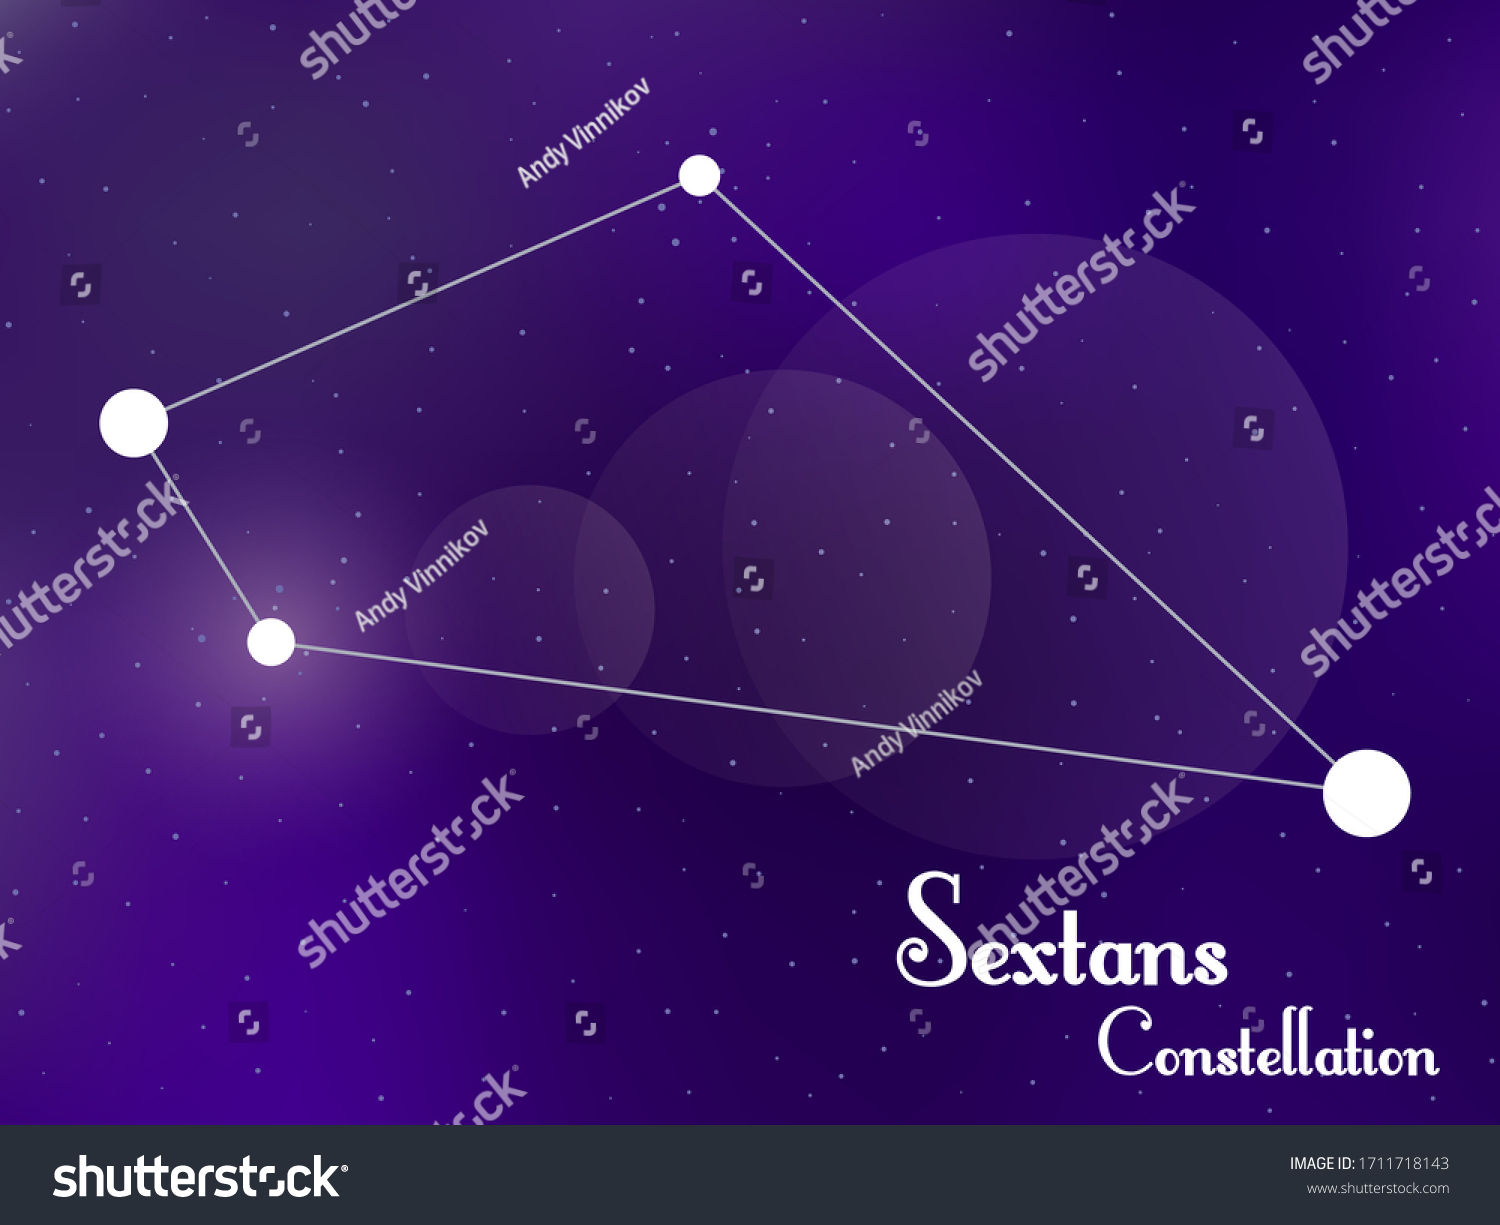 Sextans Constellation Starry Night Sky Cluster Stock Vector Royalty Free 1711718143 Shutterstock